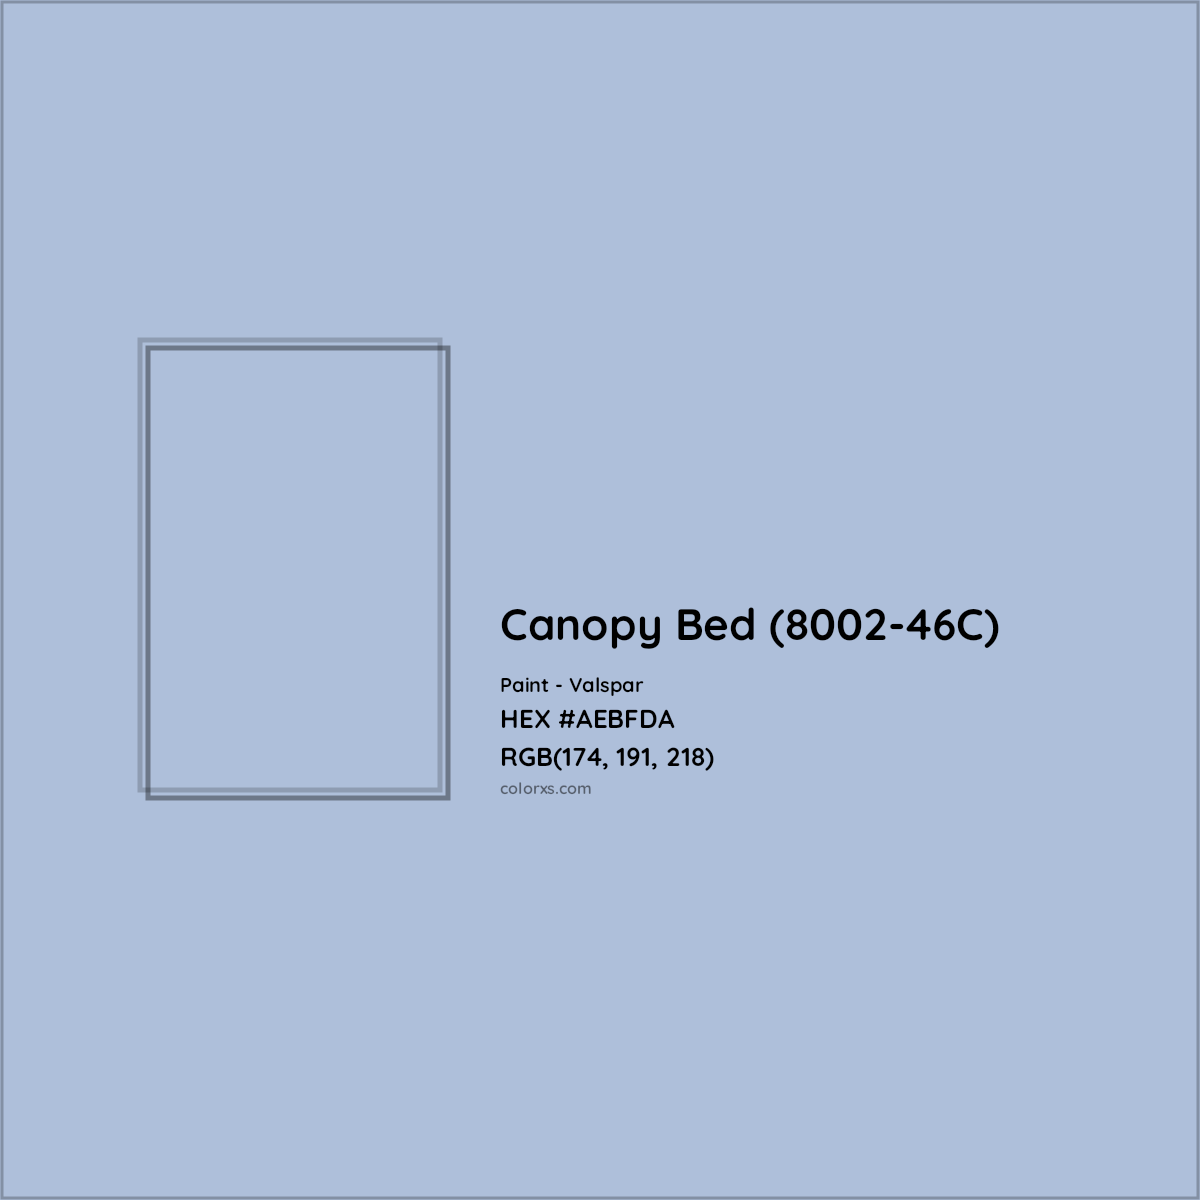 HEX #AEBFDA Canopy Bed (8002-46C) Paint Valspar - Color Code